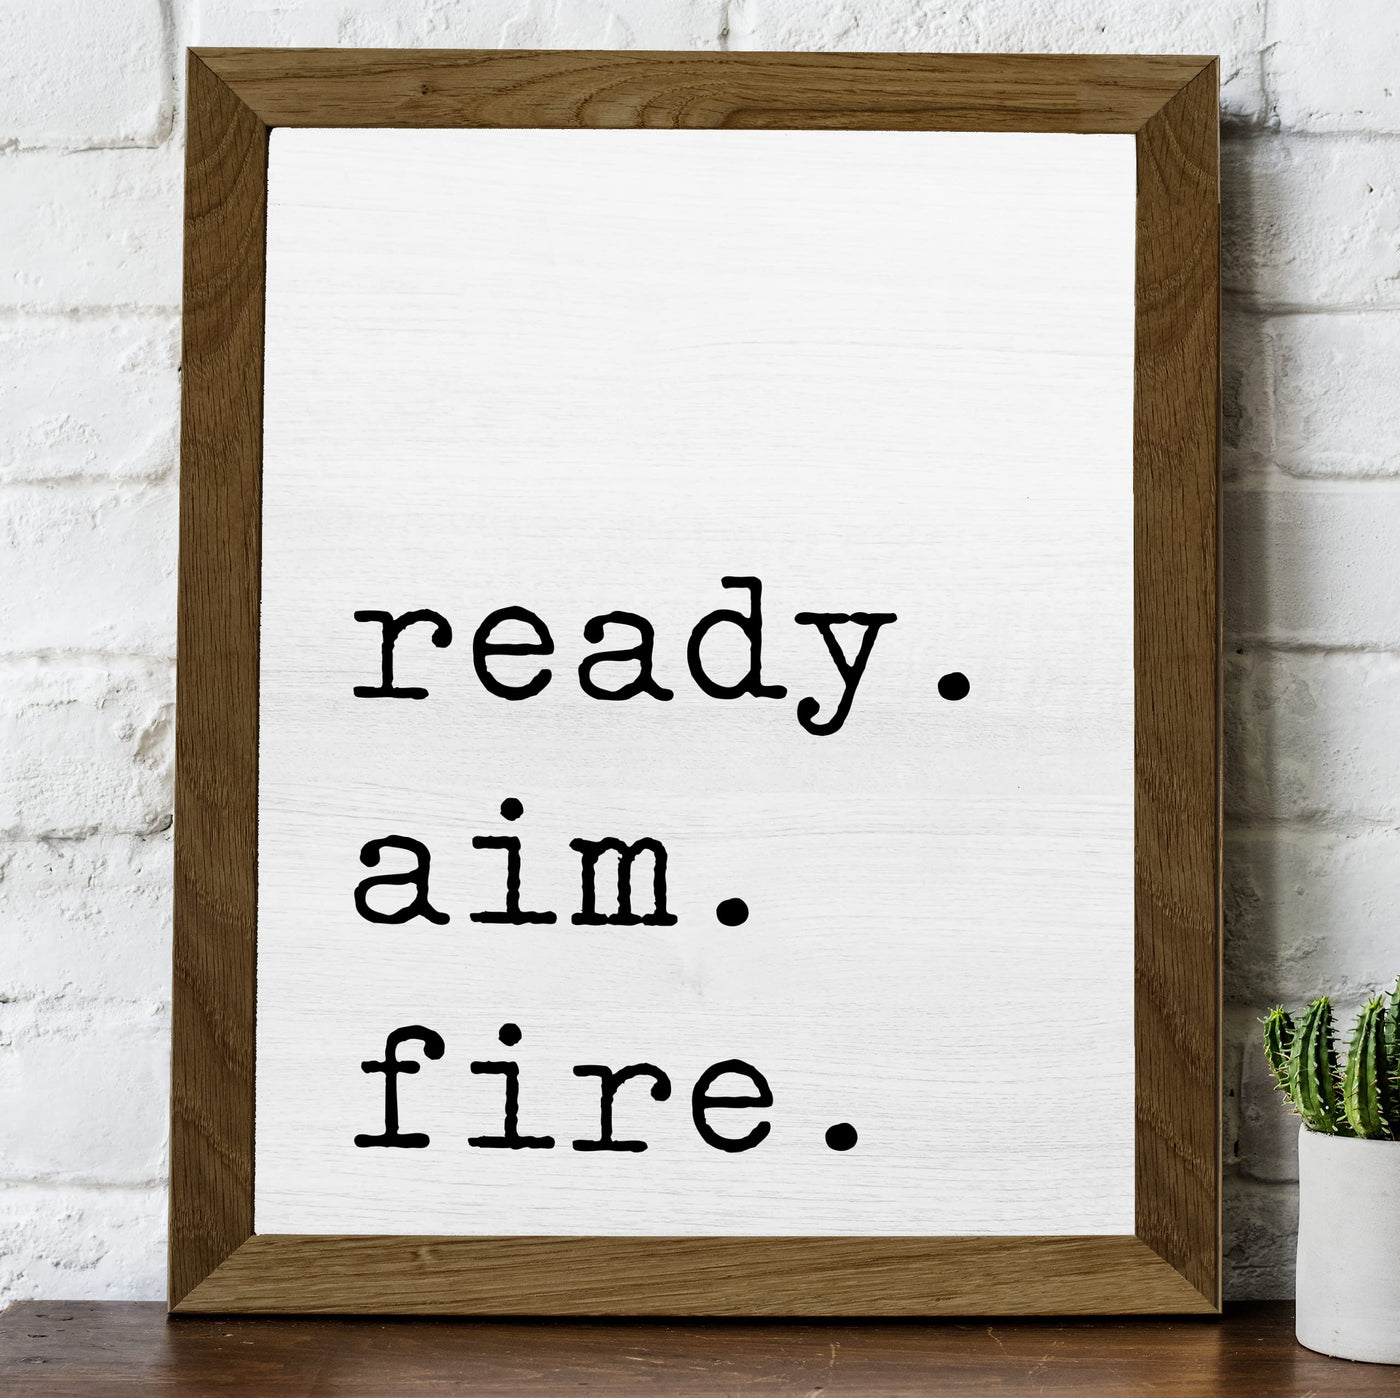 Ready. Aim. Fire. Funny Bathroom Quotes Wall Decor -8 x 10" Modern Farmhouse Art Wall Print -Ready to Frame. Humorous Toilet Decoration for Home-Office-Guest House-Cabin. Fun Restroom Sign!